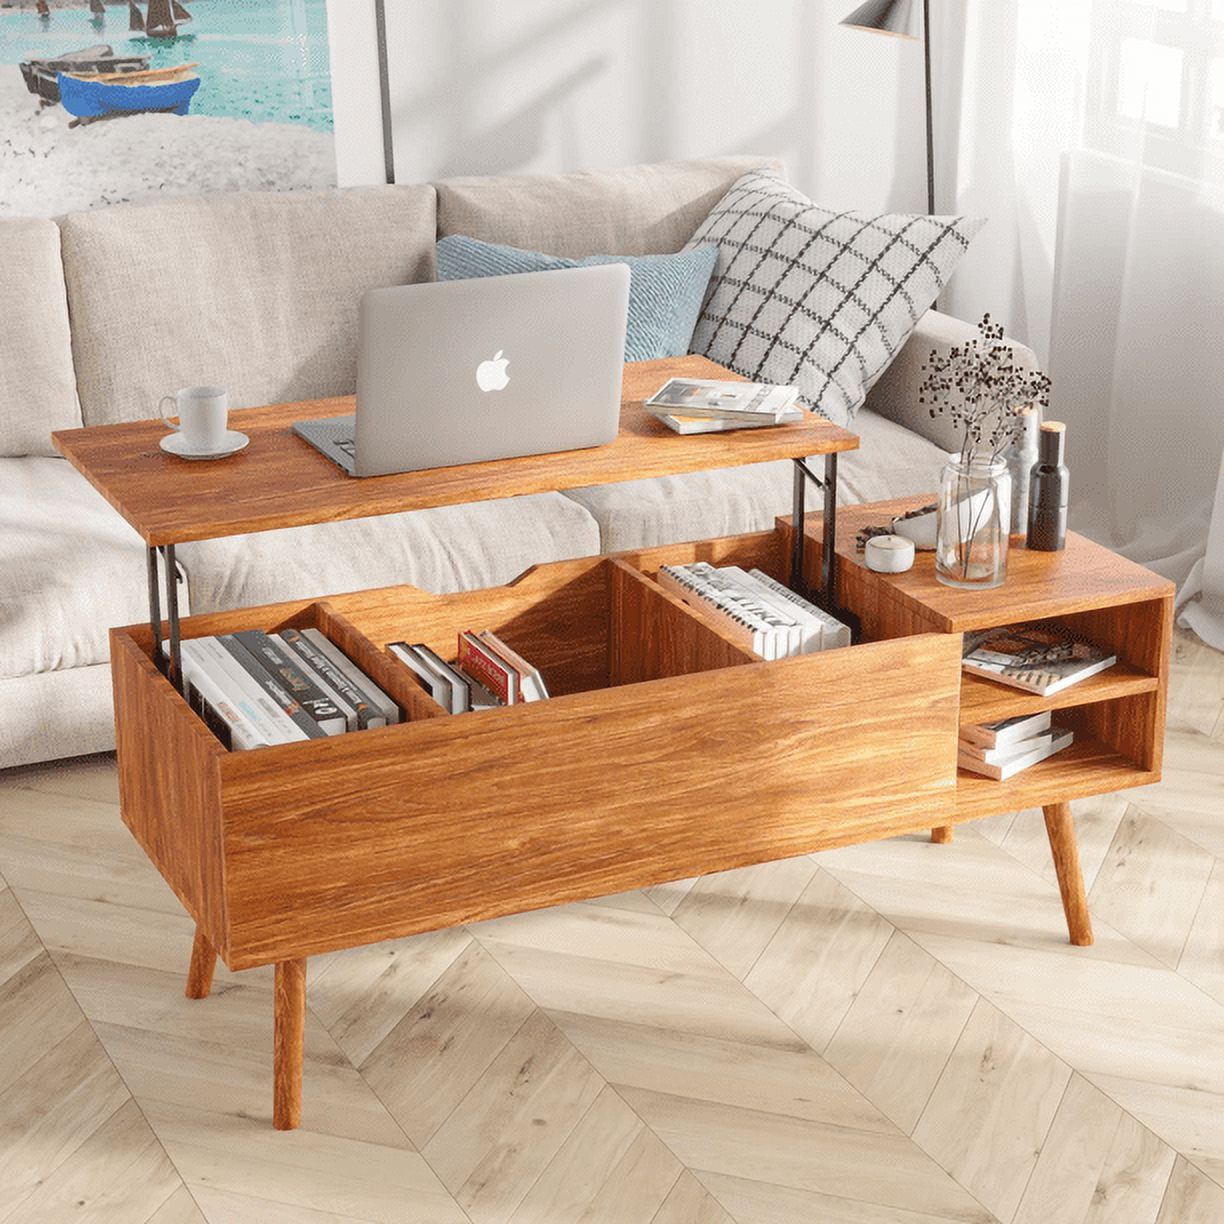 Modern Lift Top Coffee Table With Hidden Compartment Storage,Adjustable Wood  Table For Living Room,Brown – Walmart Pertaining To Modern Wooden Lift Top Tables (Photo 2 of 15)